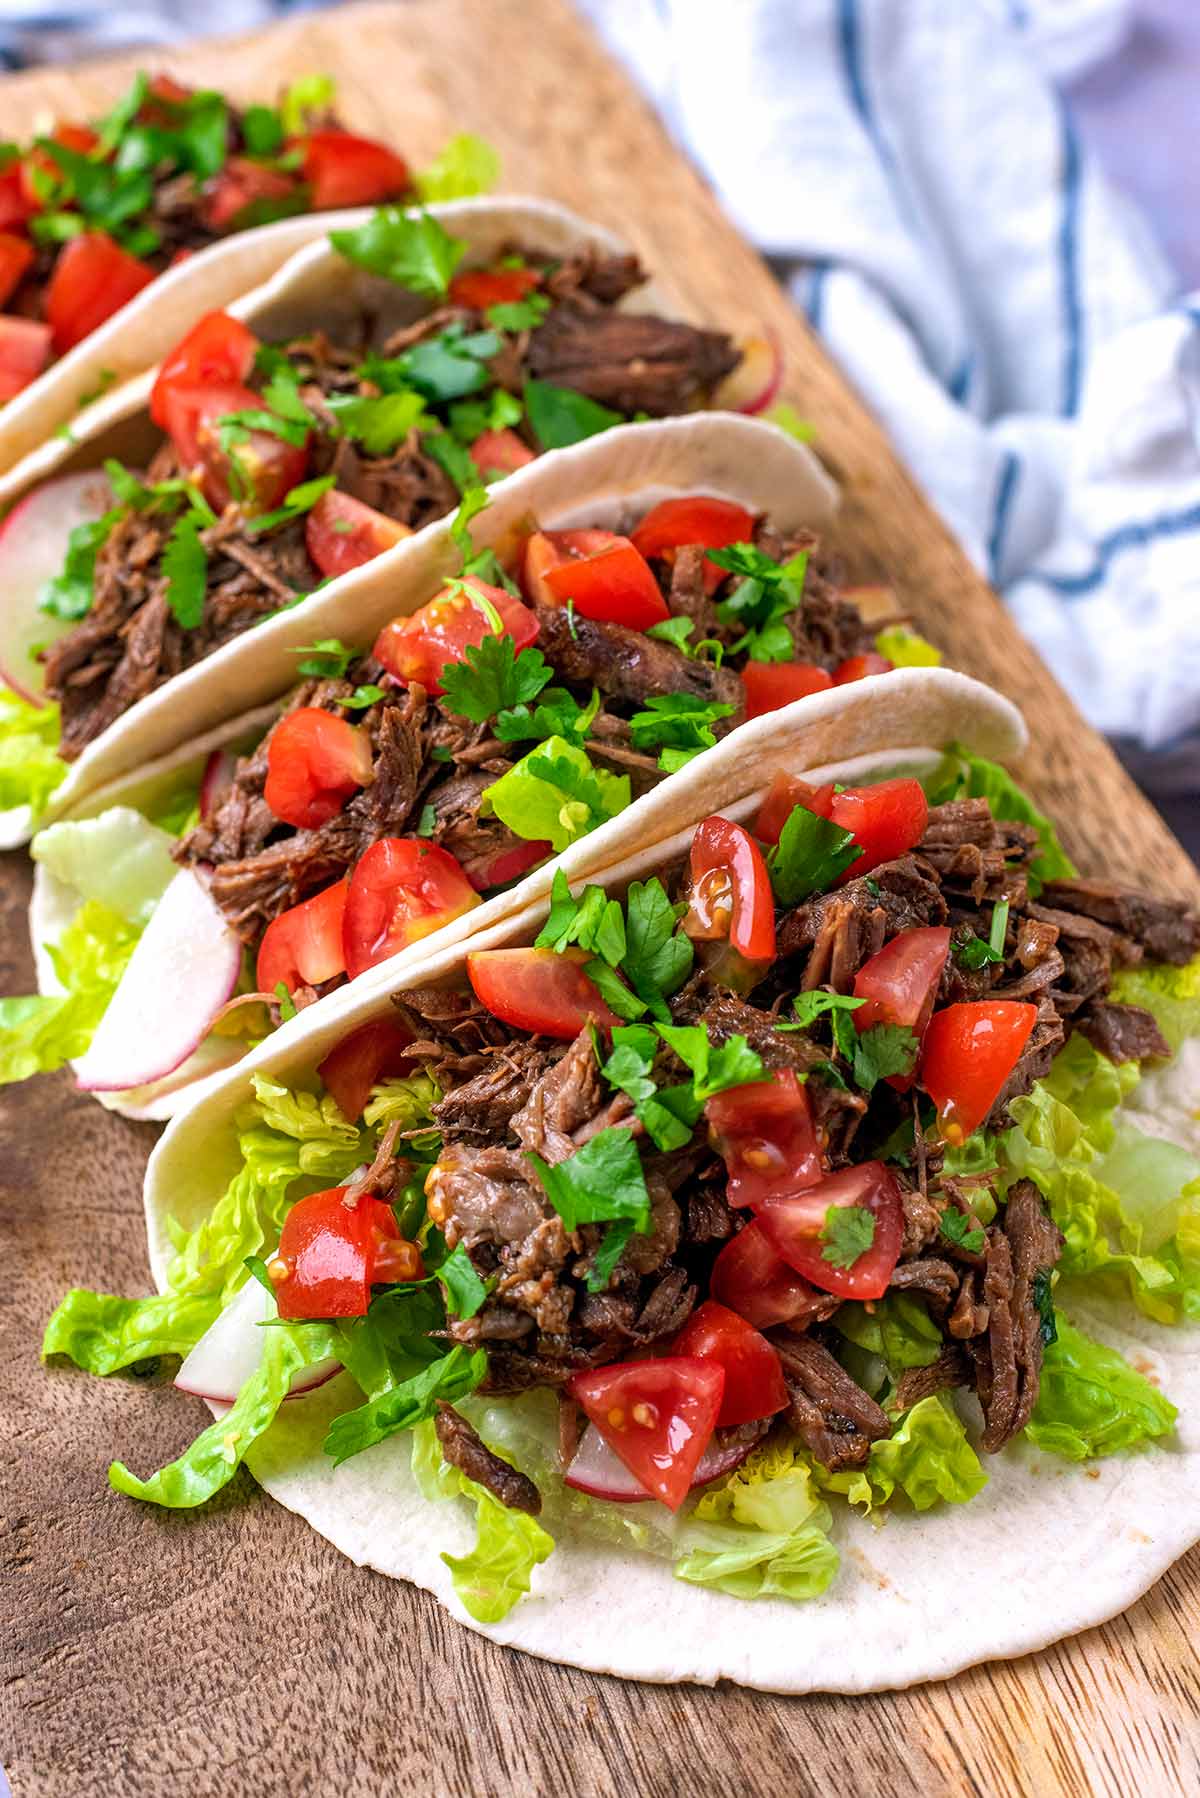 A row of shredded beef tacos on a wooden serving board.